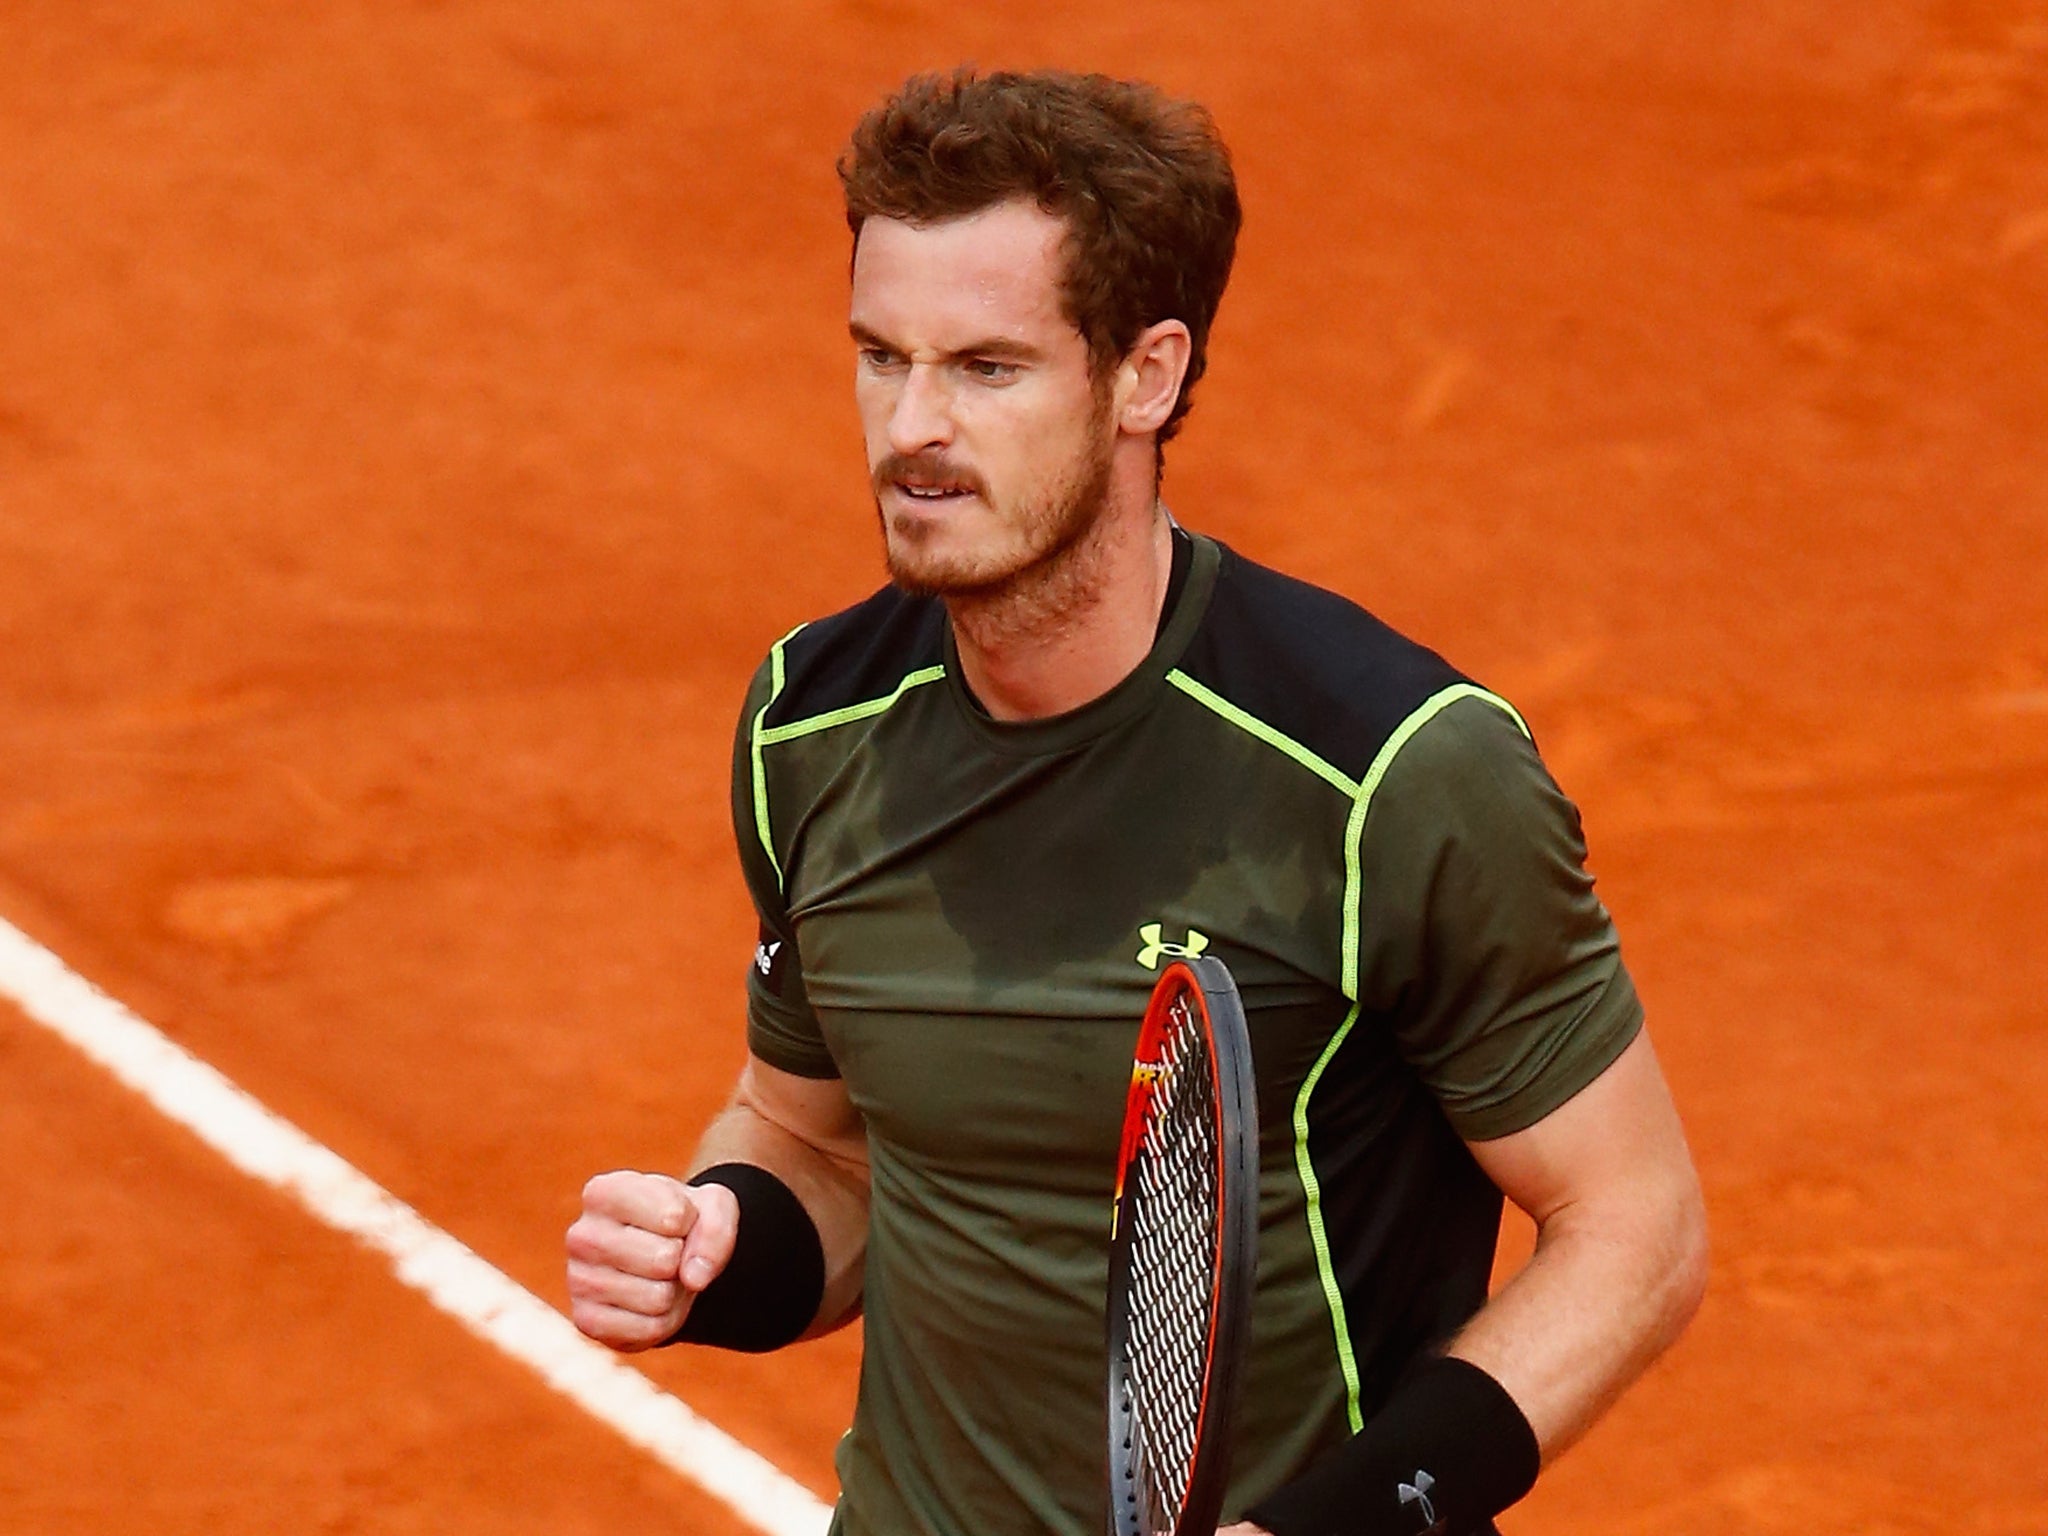 Andy Murray in the Madrid Open final